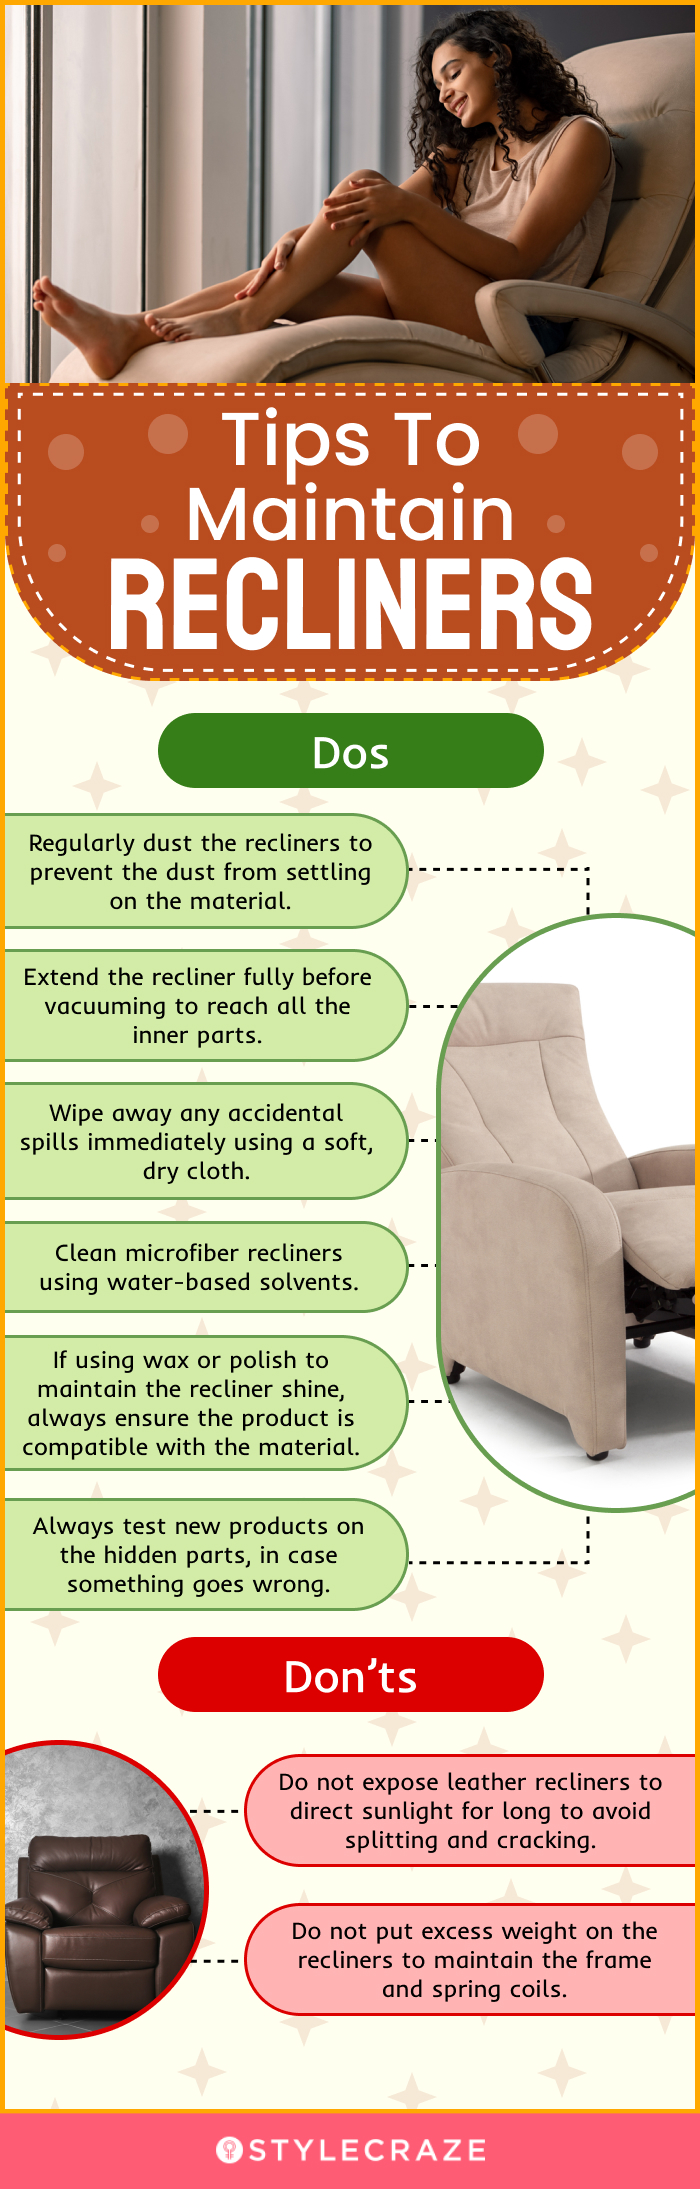 Tips To Maintain Recliners